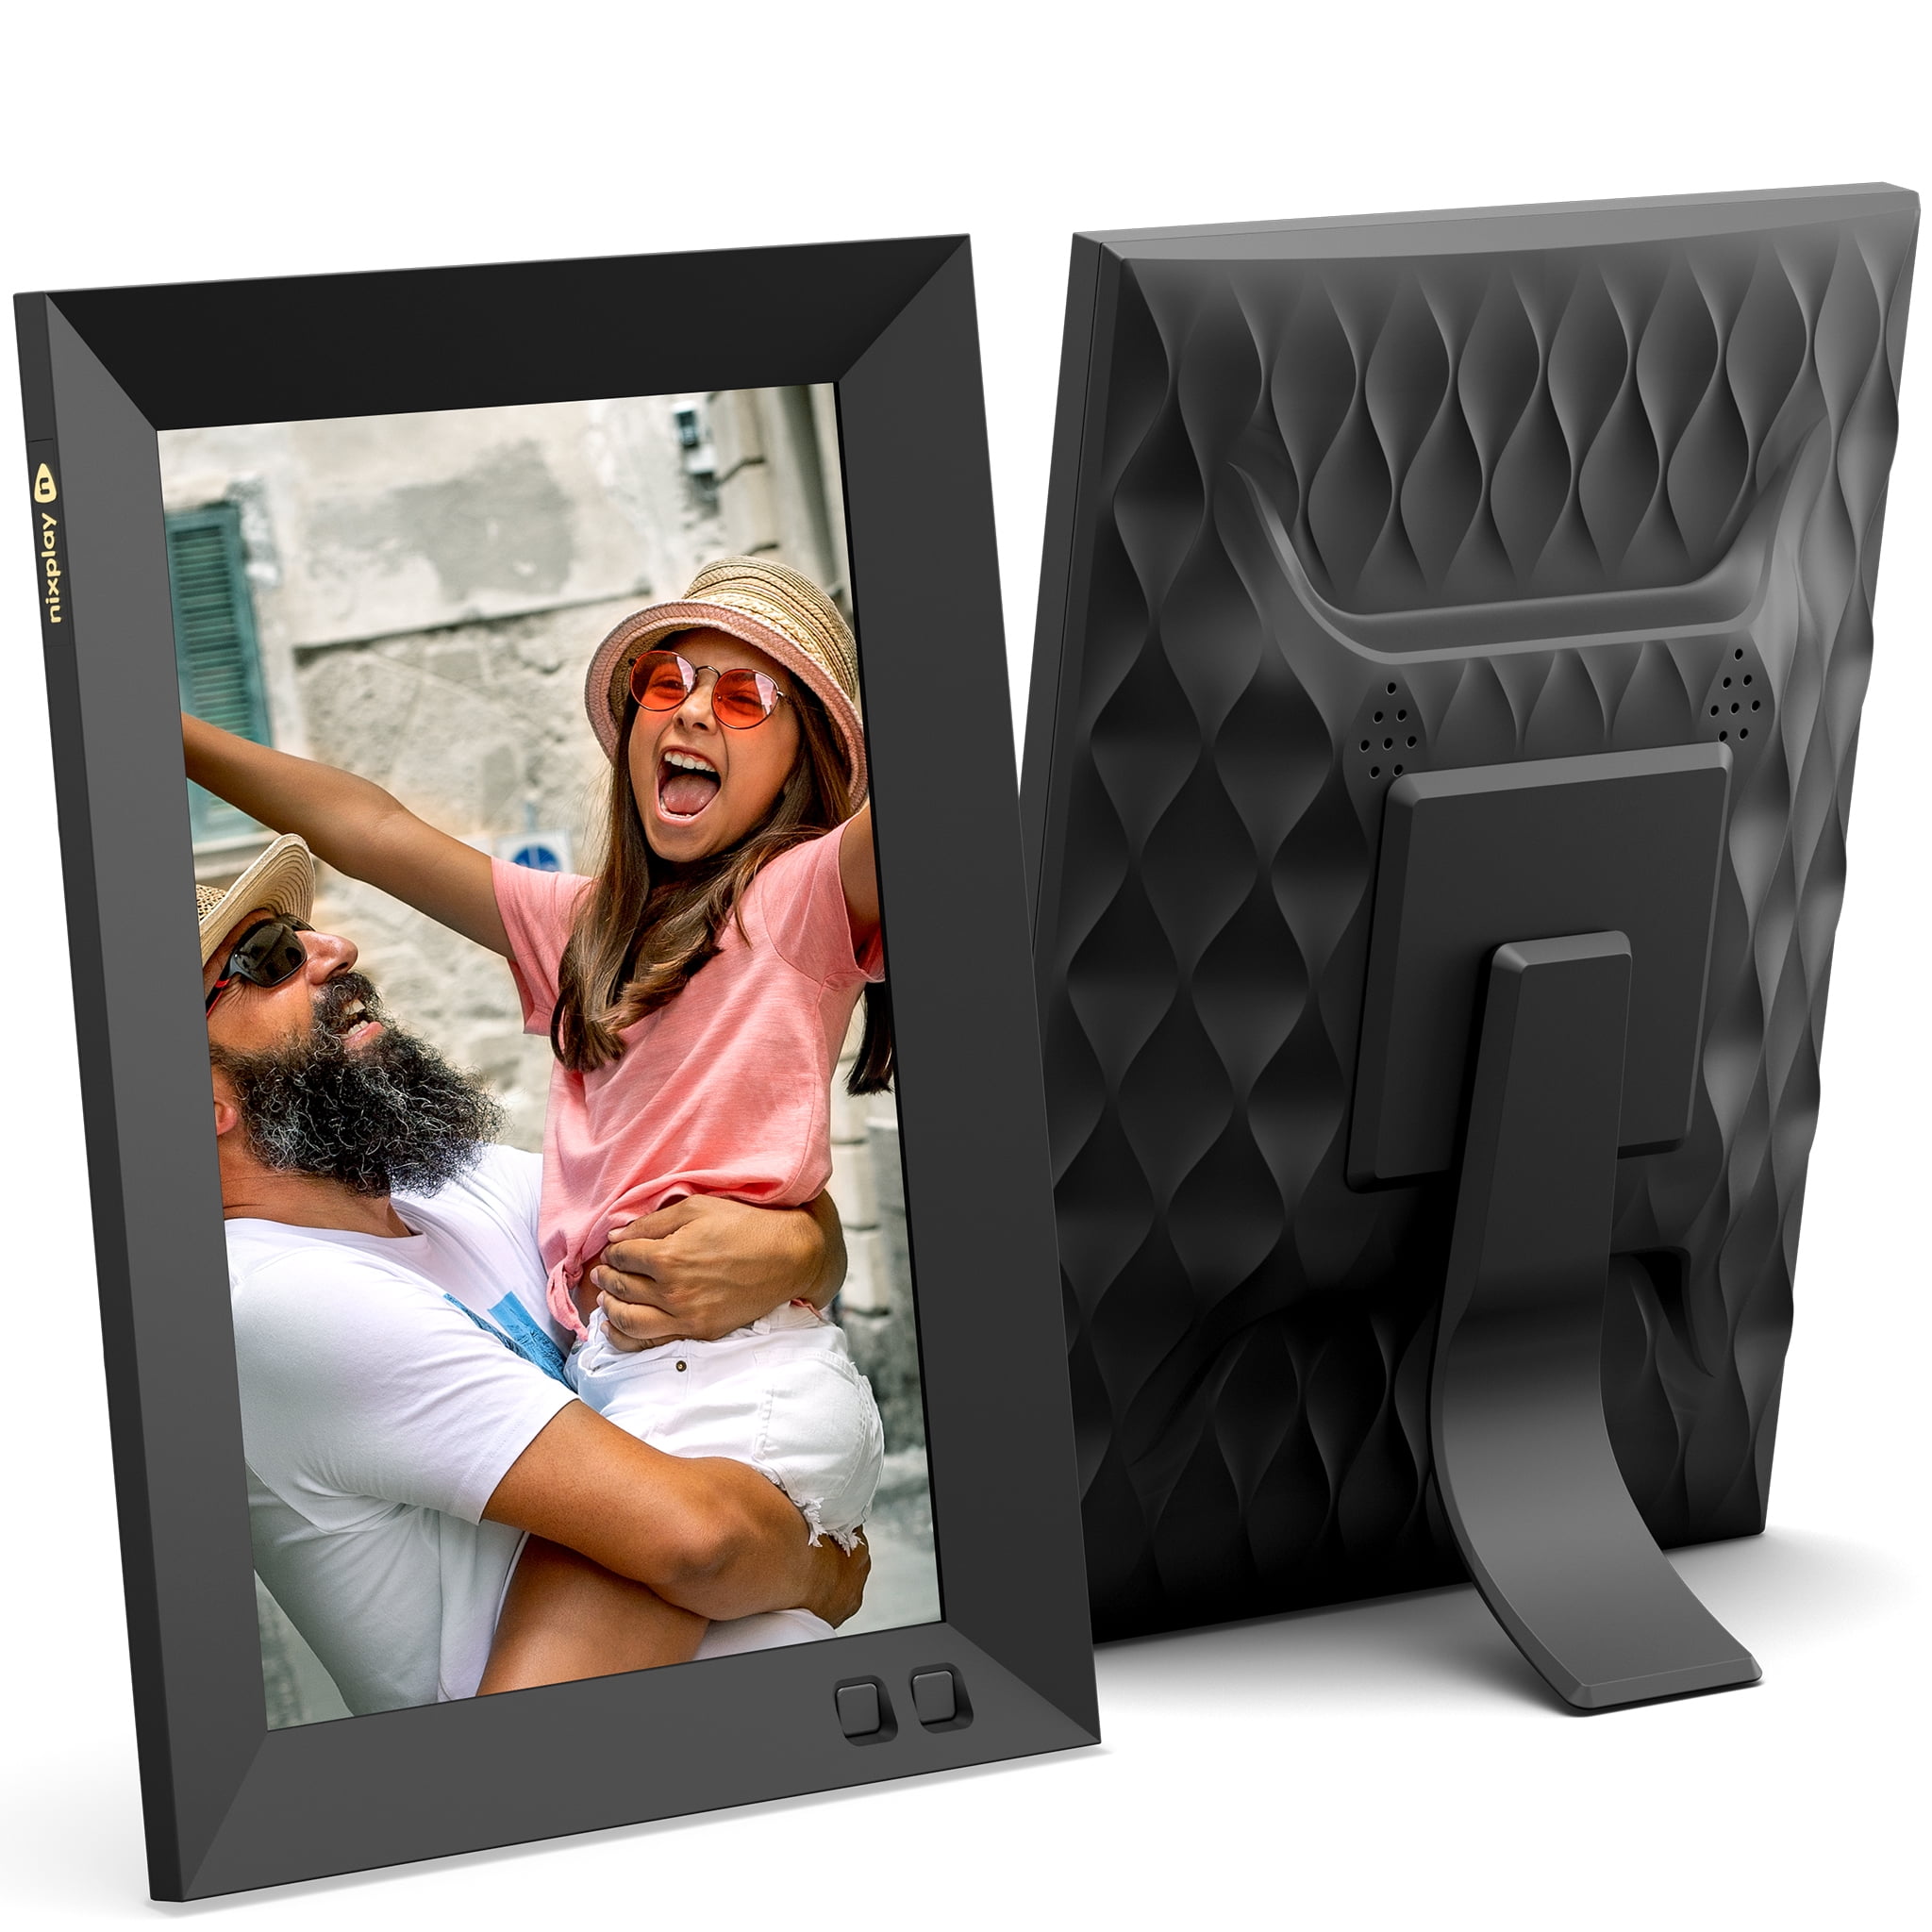 Nixplay Seed 10 Inch WiFi Digital Picture Frame Share Moments Instantly via App or E-Mail